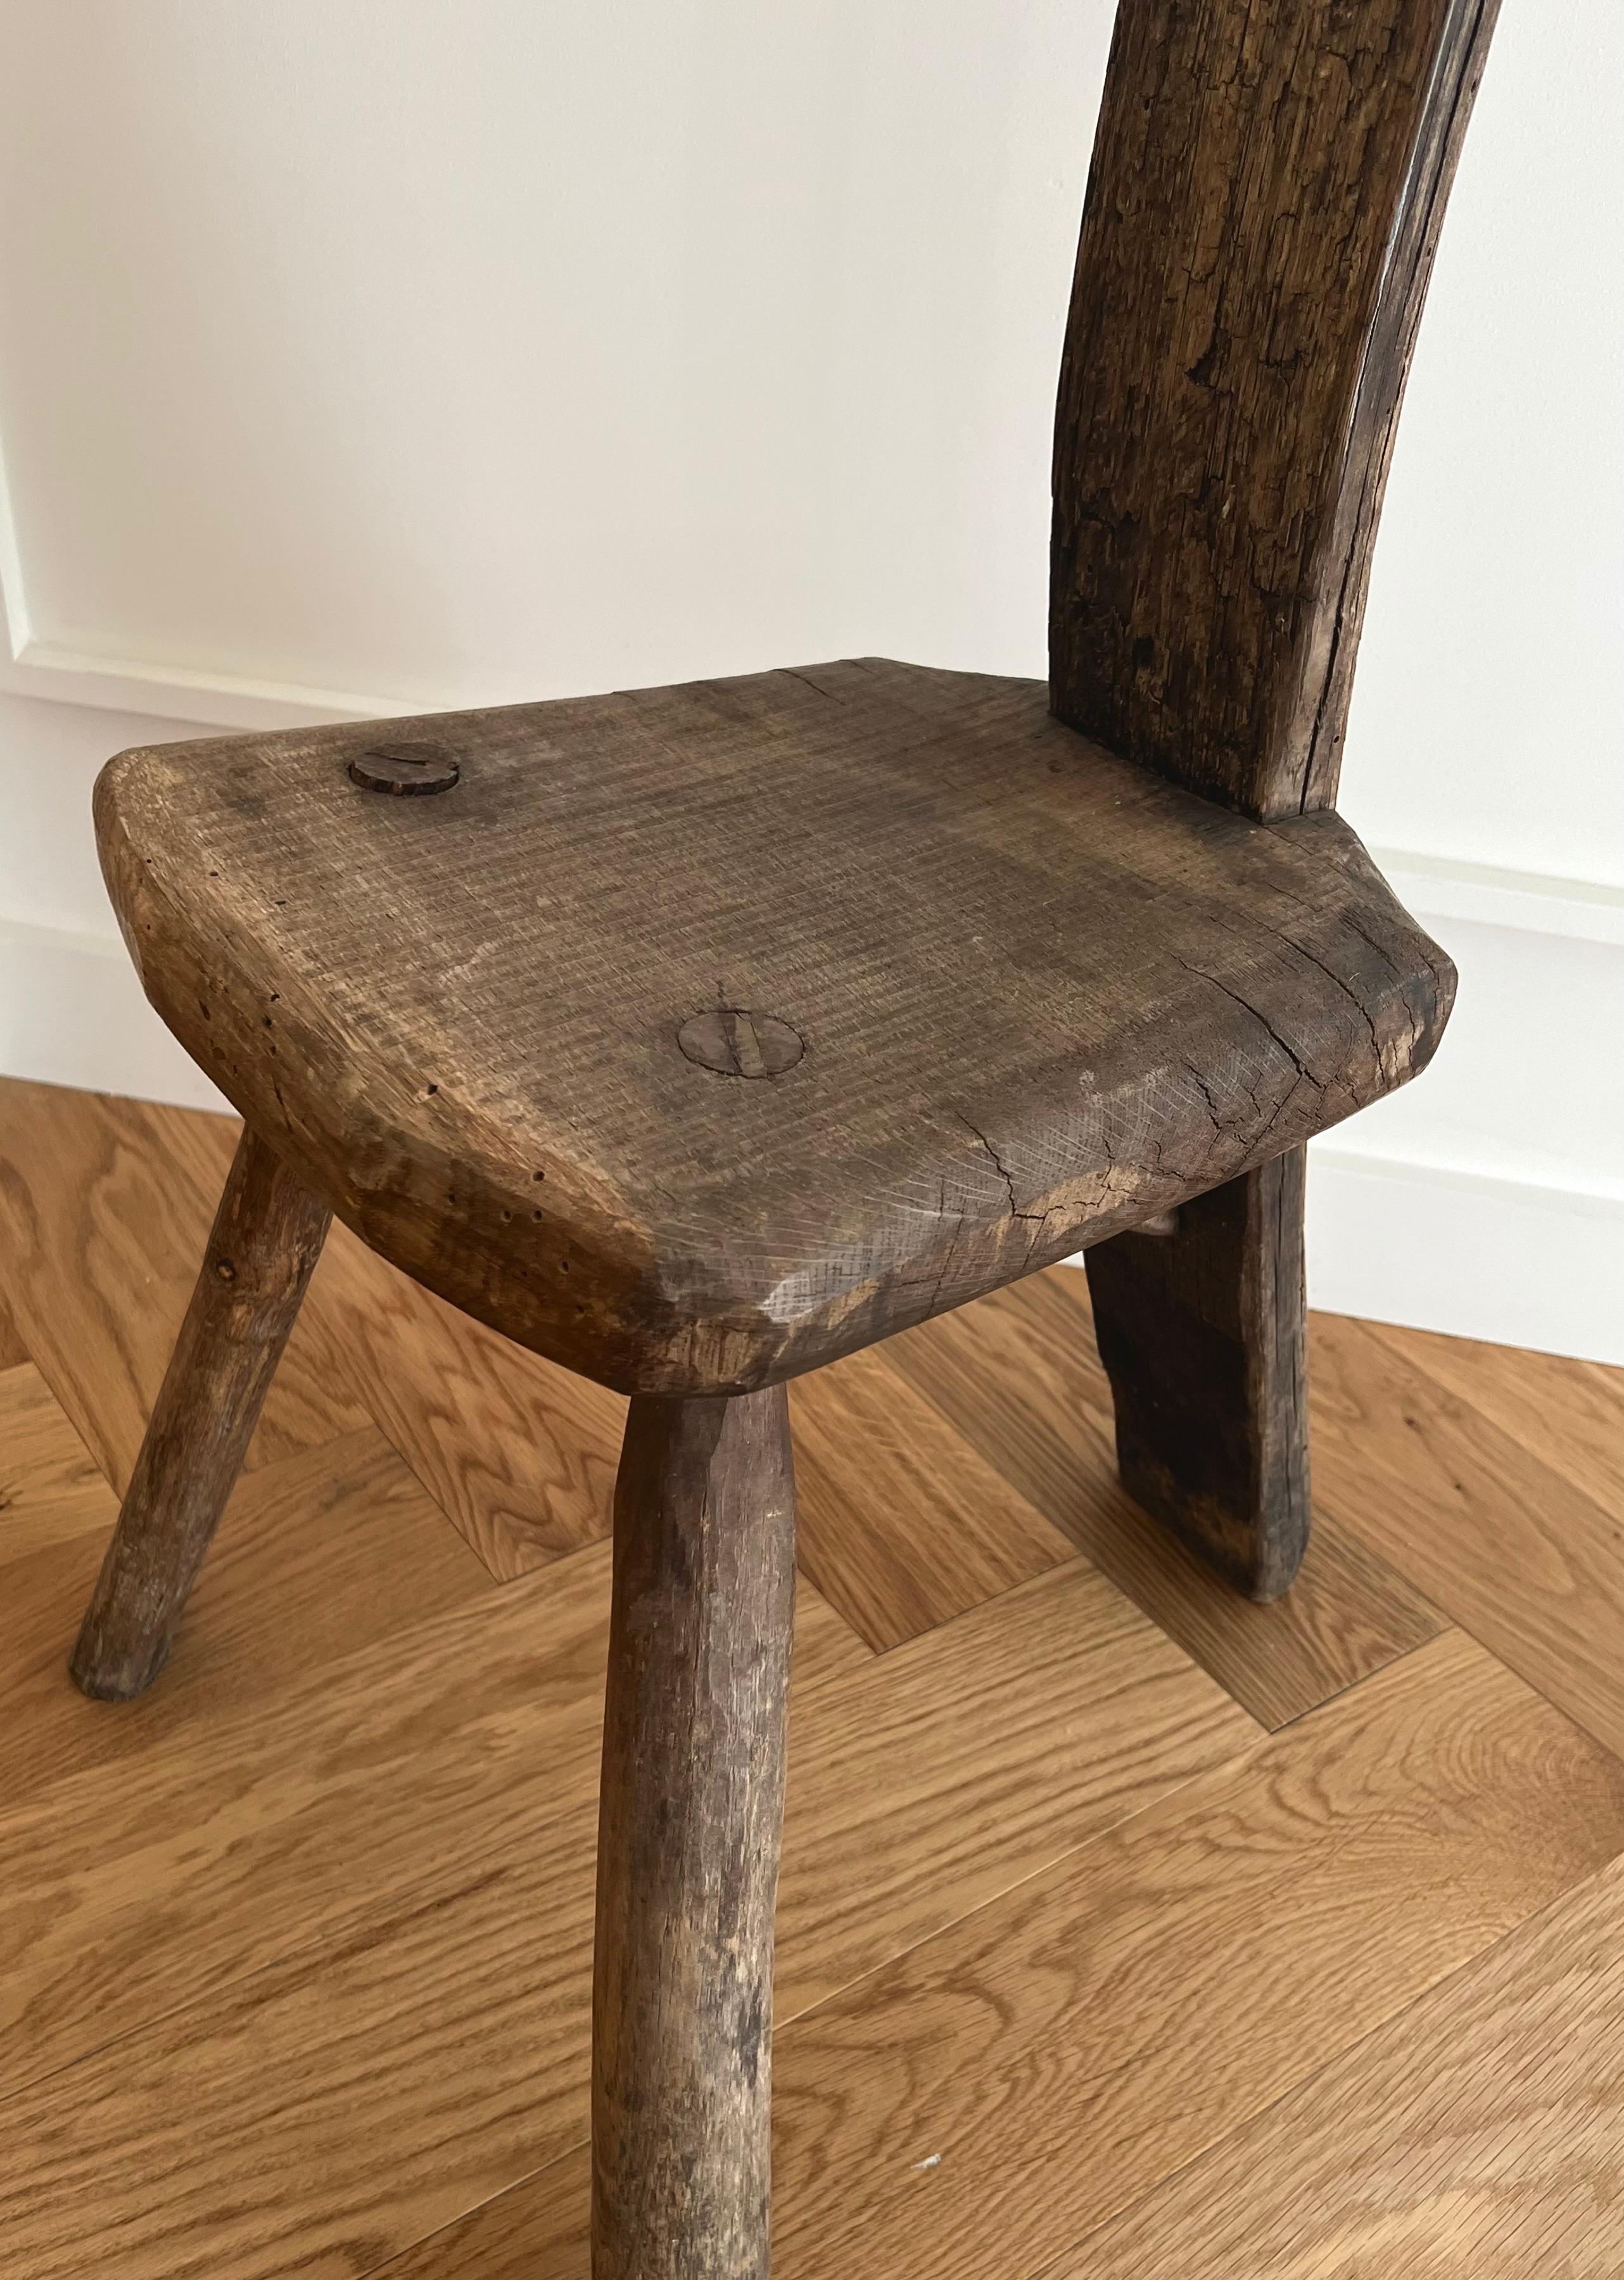 Exotic African Accented Primitive stool in rich, dark patina.